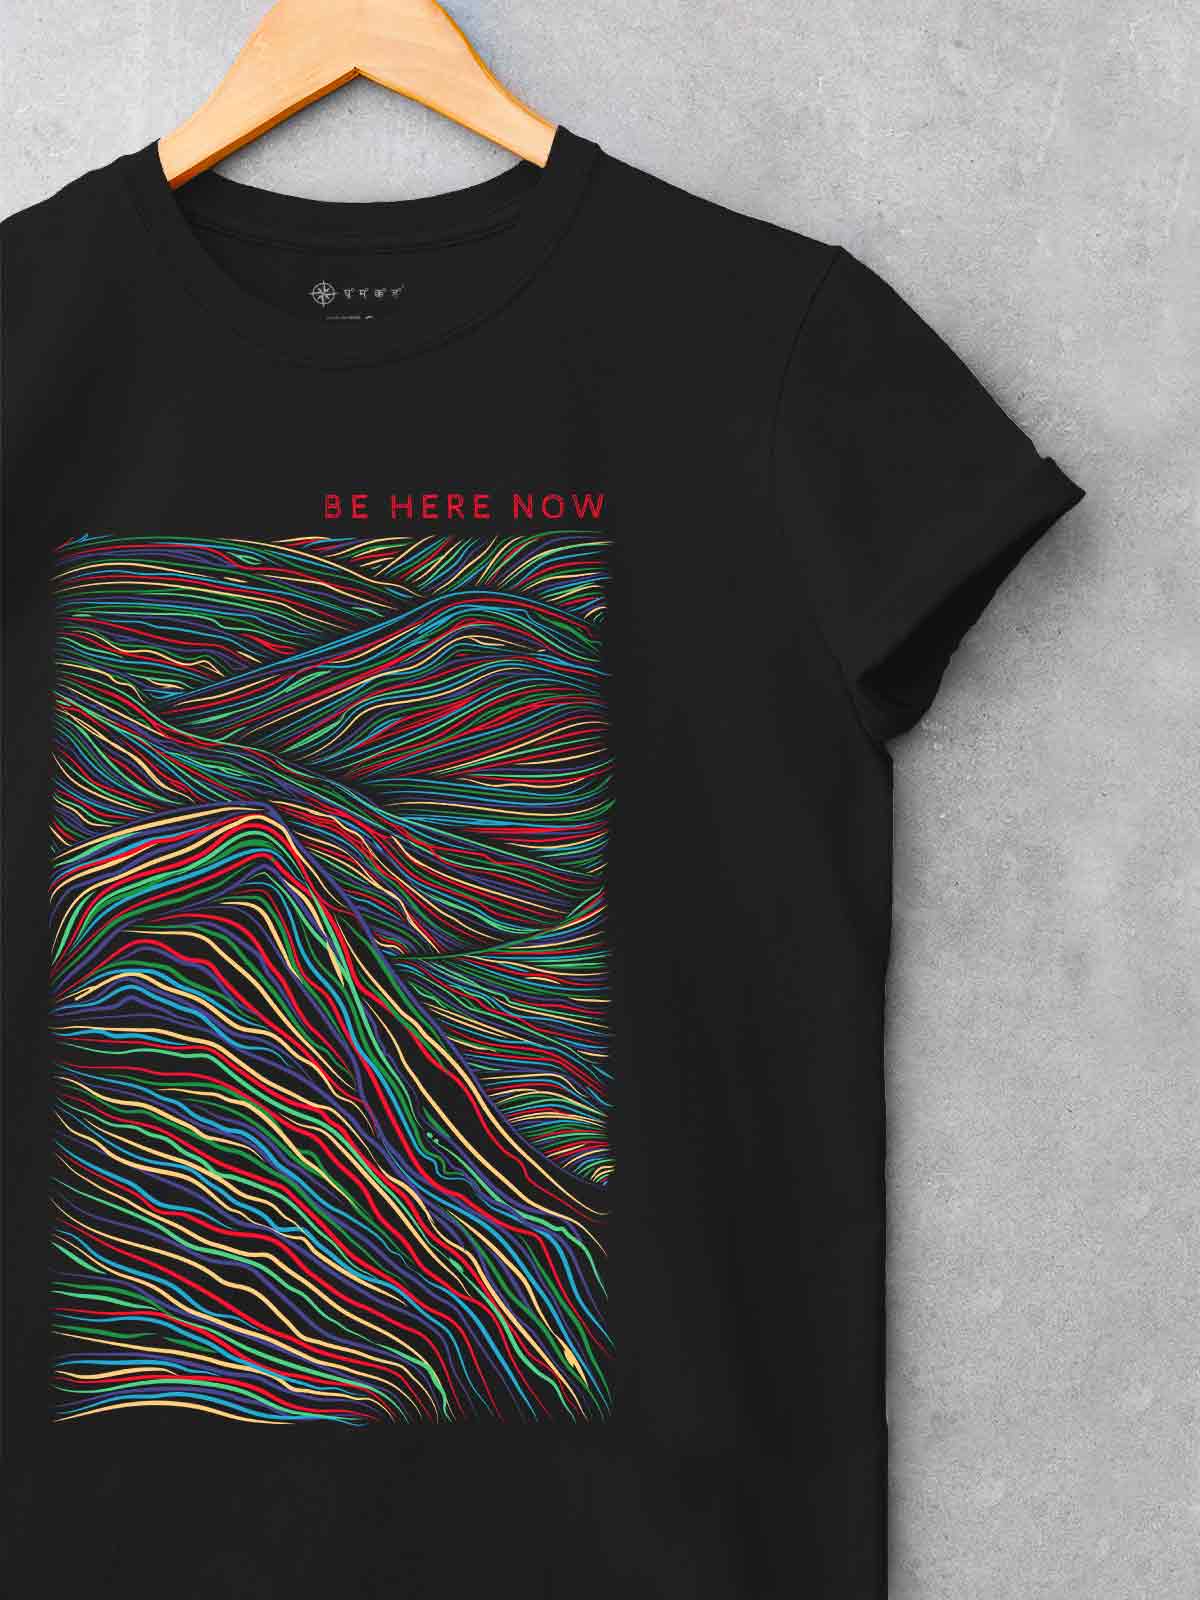 Be-there-now-Printed-t-shirt-for-men by Ghumakkad